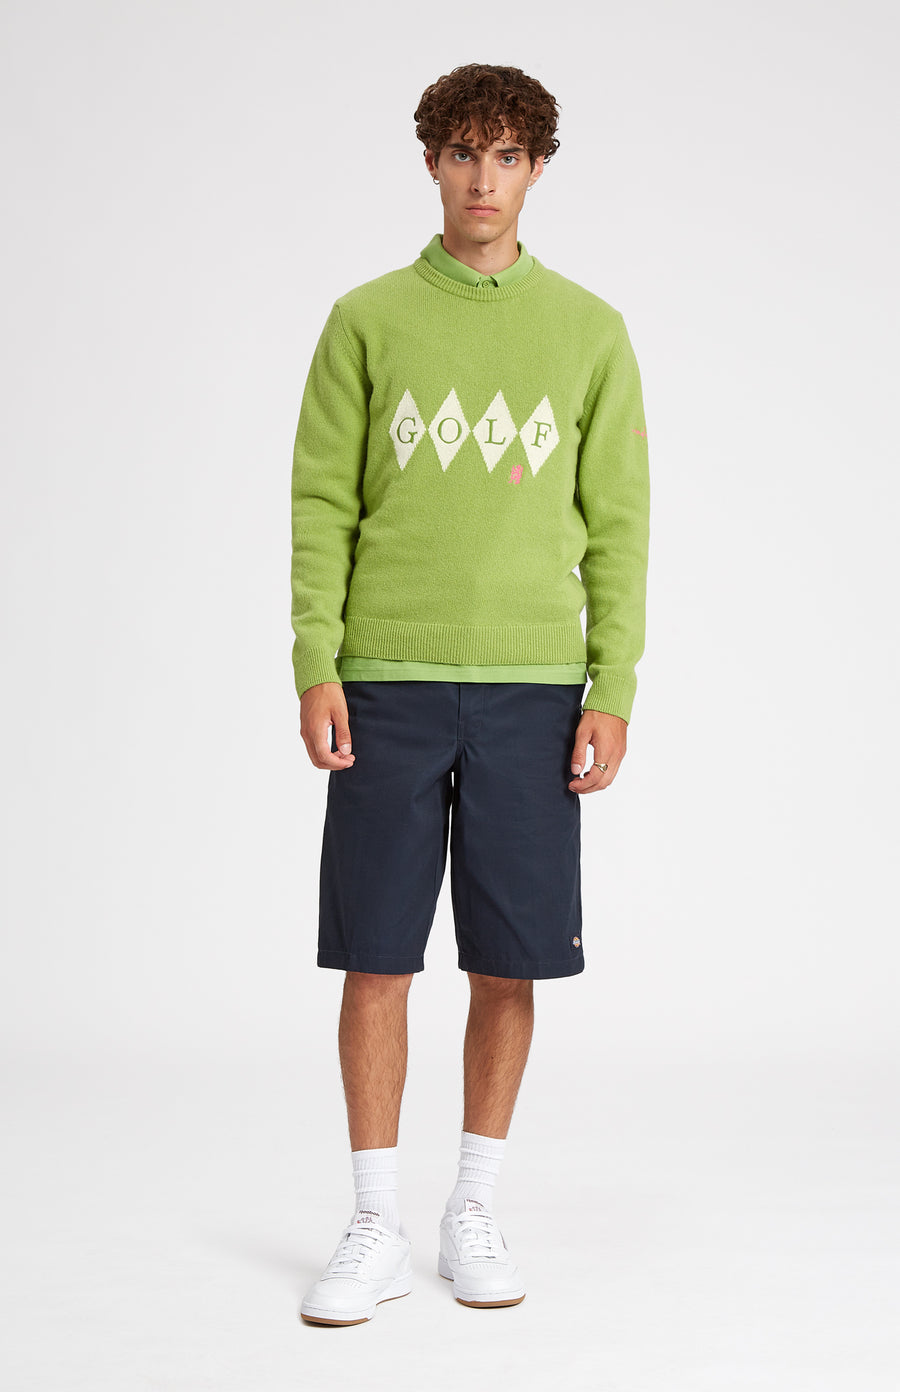 Unisex heritage diamond motif golf jumper in Green and Ivory on male model - Pringle of Scotland